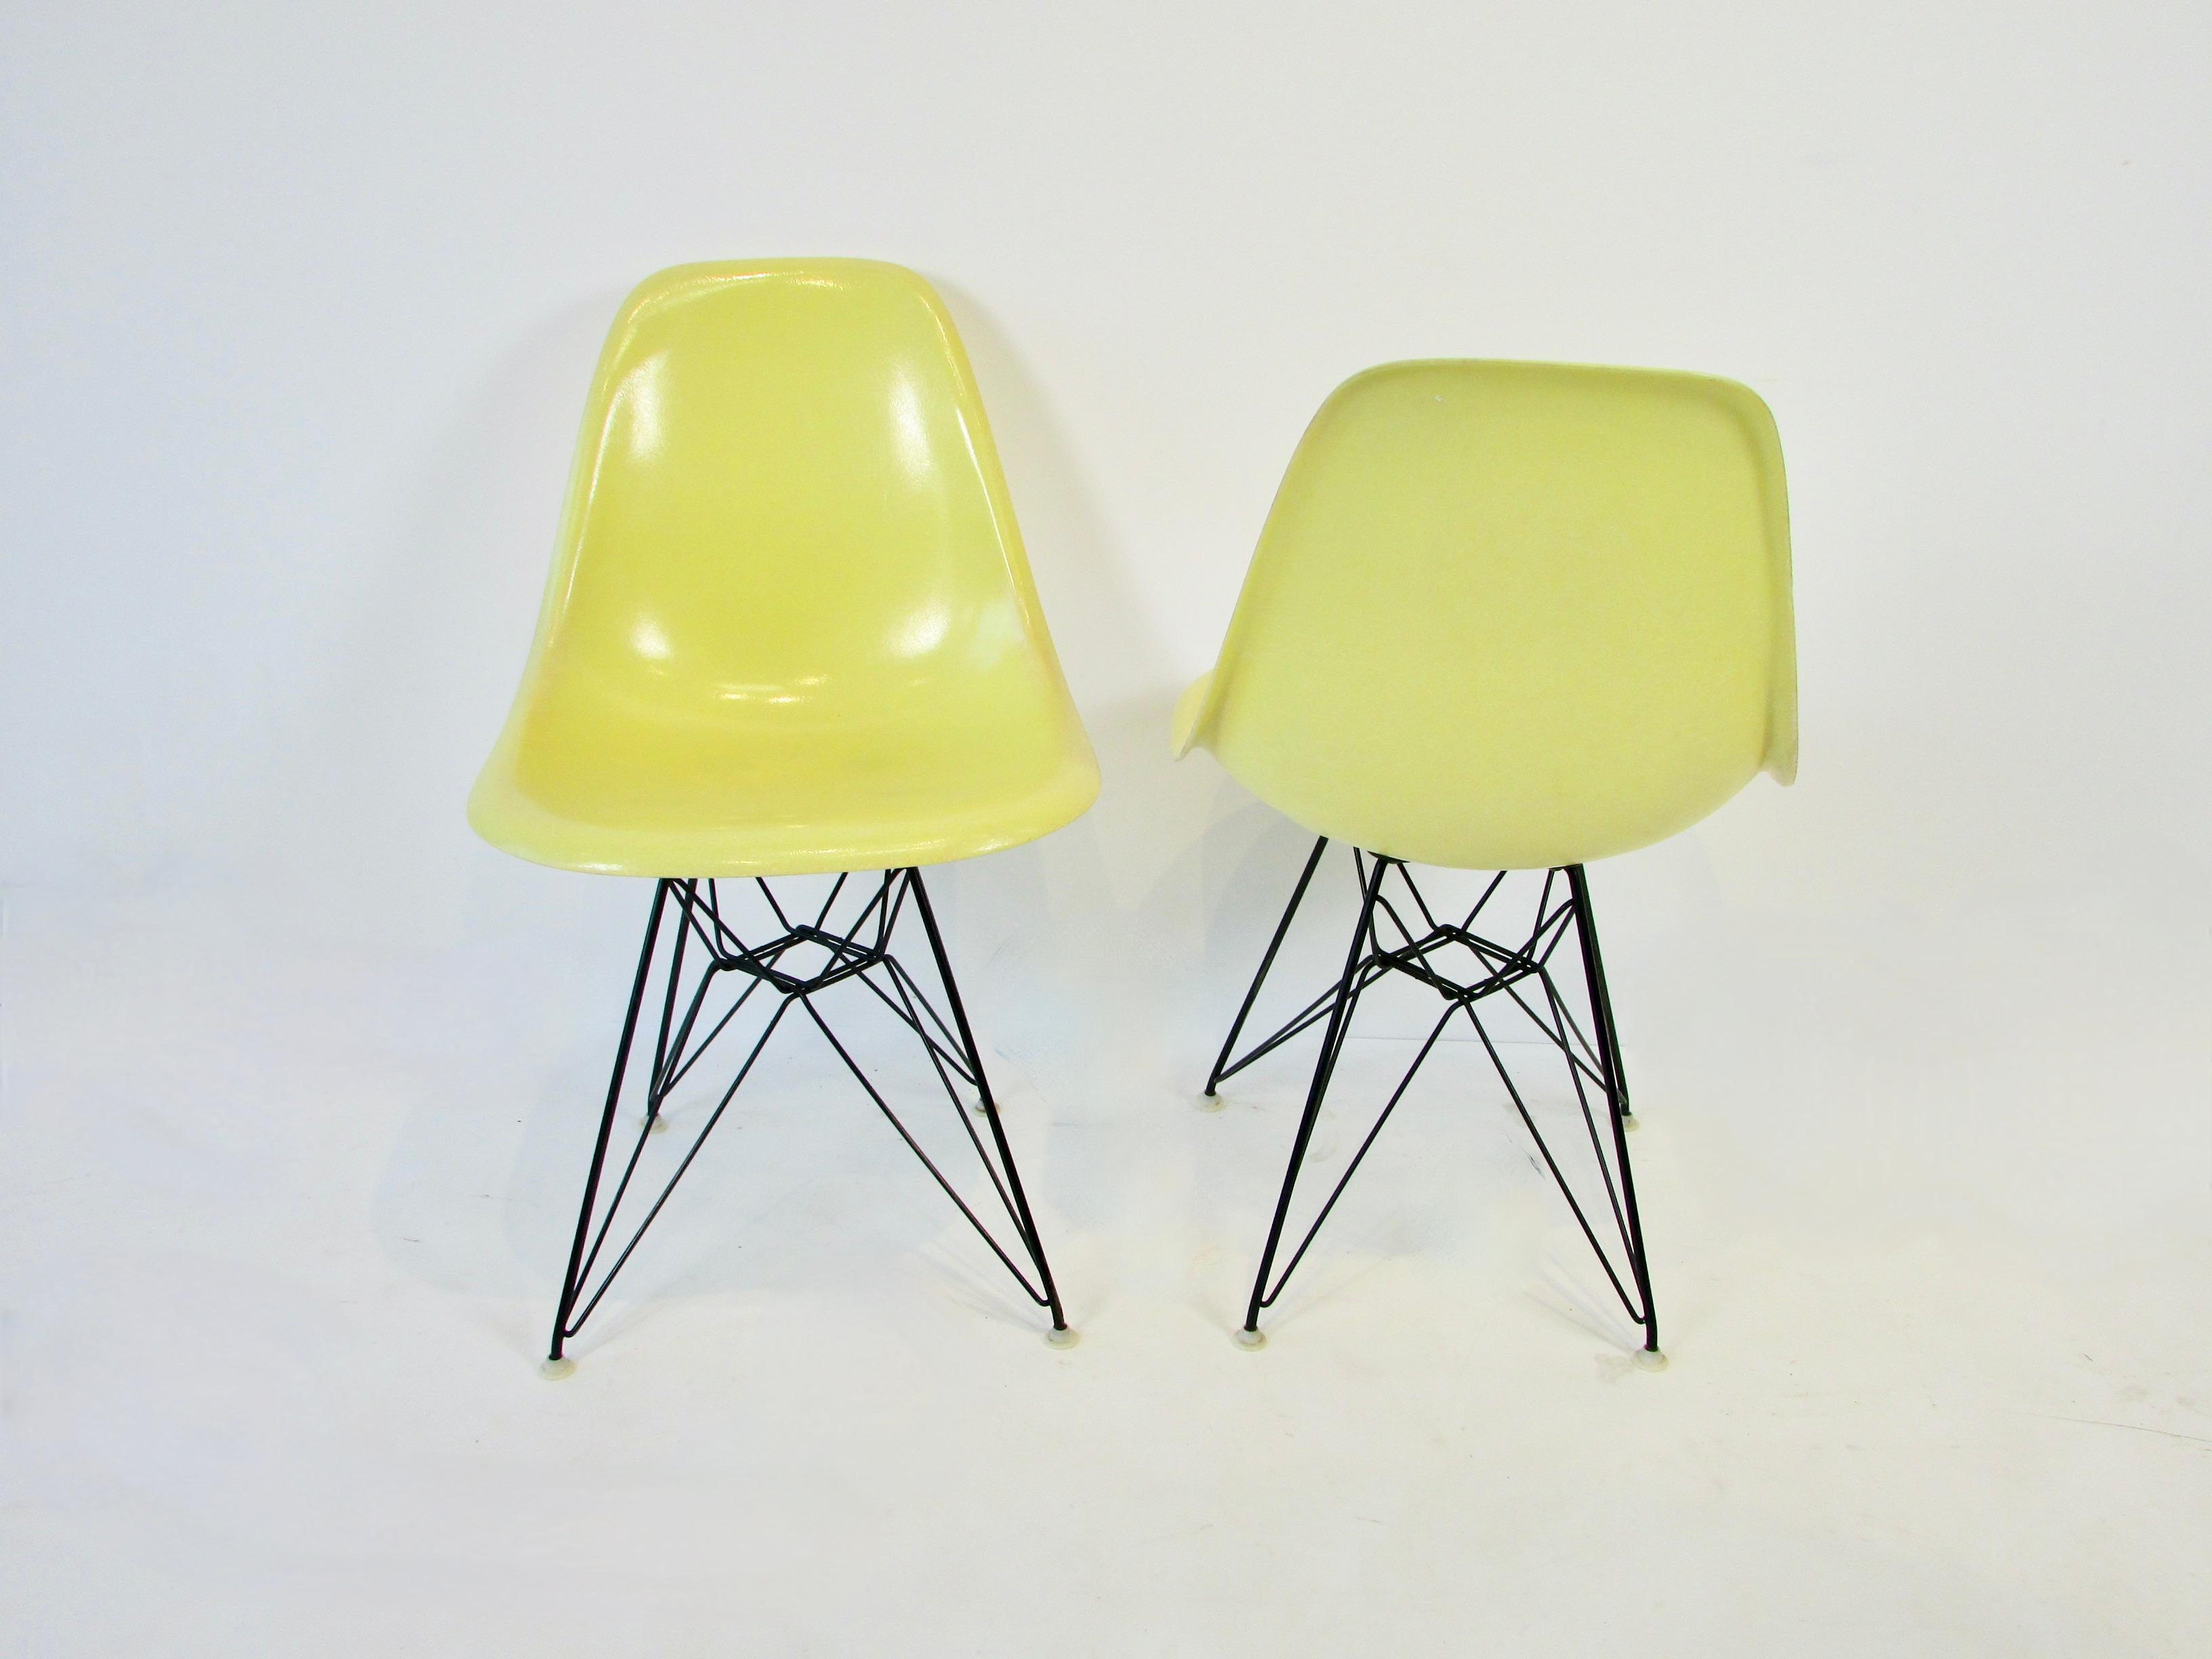 Welded Set of Four Vivid Yellow Fiberglass Eames DSR Chairs on Black Eiffel Tower Bases For Sale